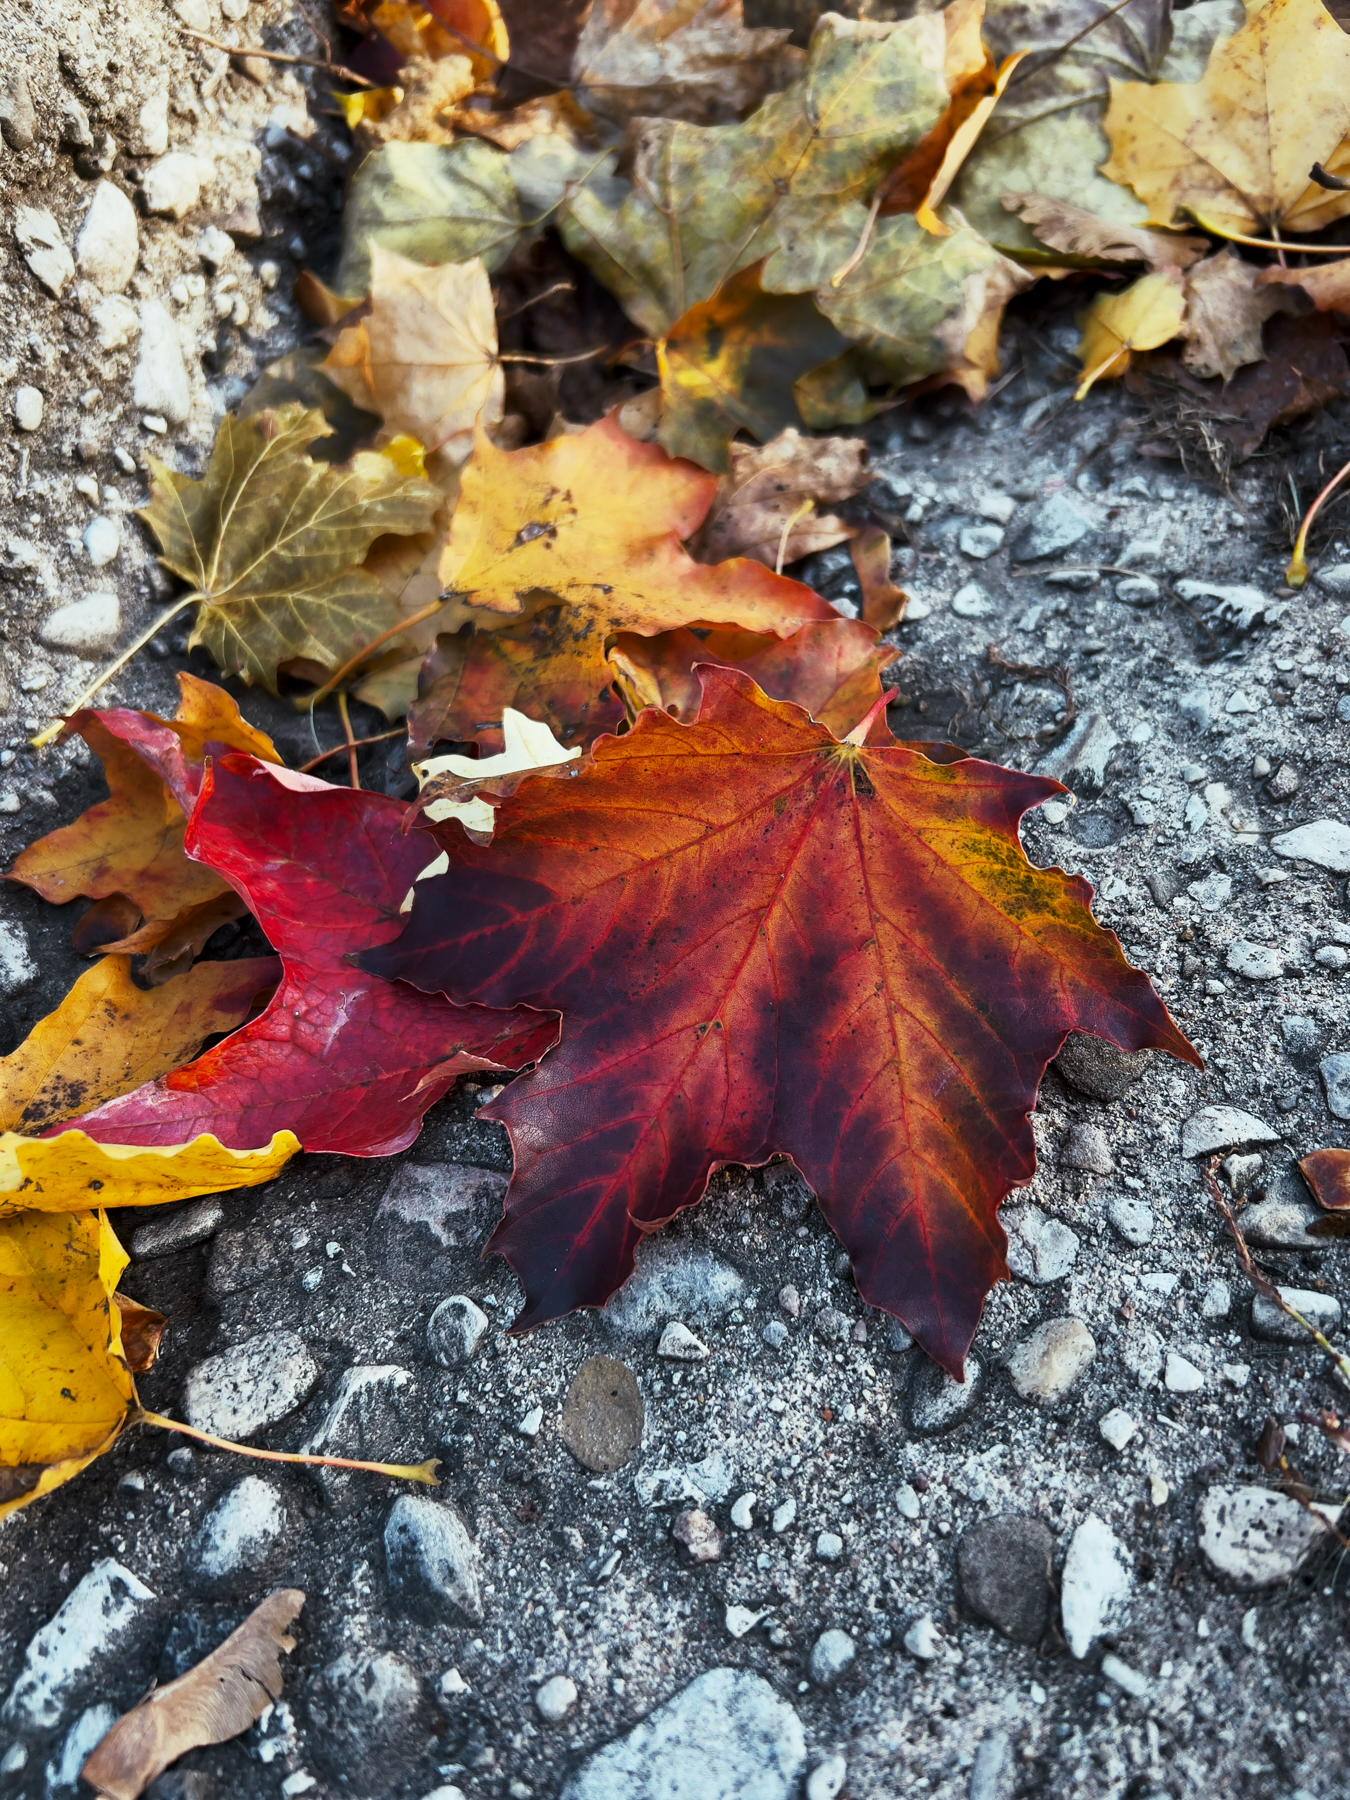 Another macro shot of a cluster of fallen leaves along the side of the road. The most prominent one—another maple leaf—is upside down in frame. The stem side of the leaf has a rich orange colour that travels along each of the veins, but turns to light red and then a dark, almost purplish hue of red at each tip of the leaf.